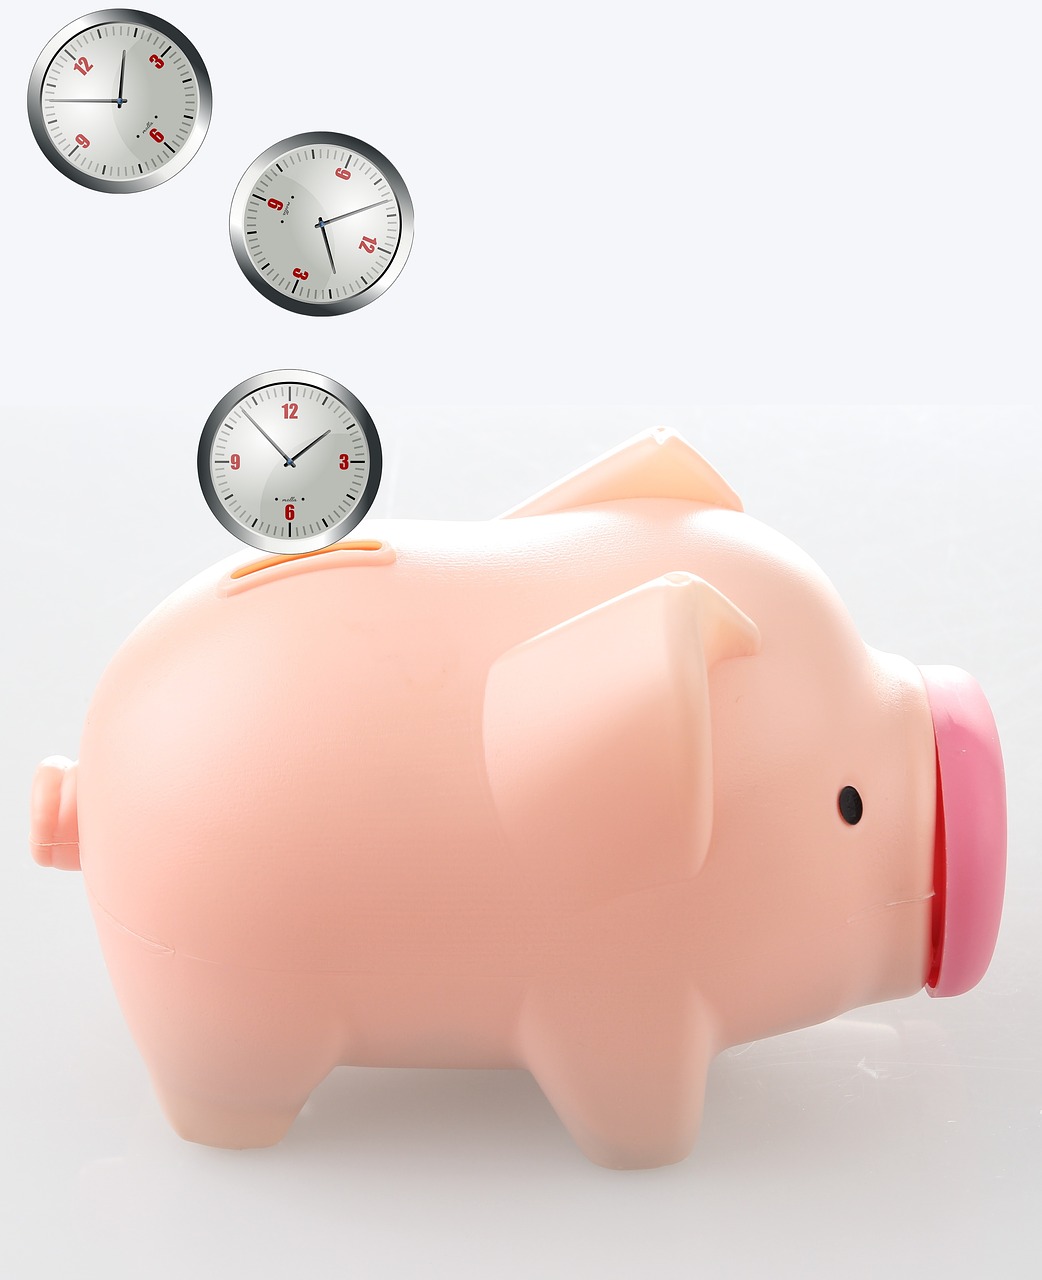 time is money- ways to be more productive for entrepreneurs and self employed